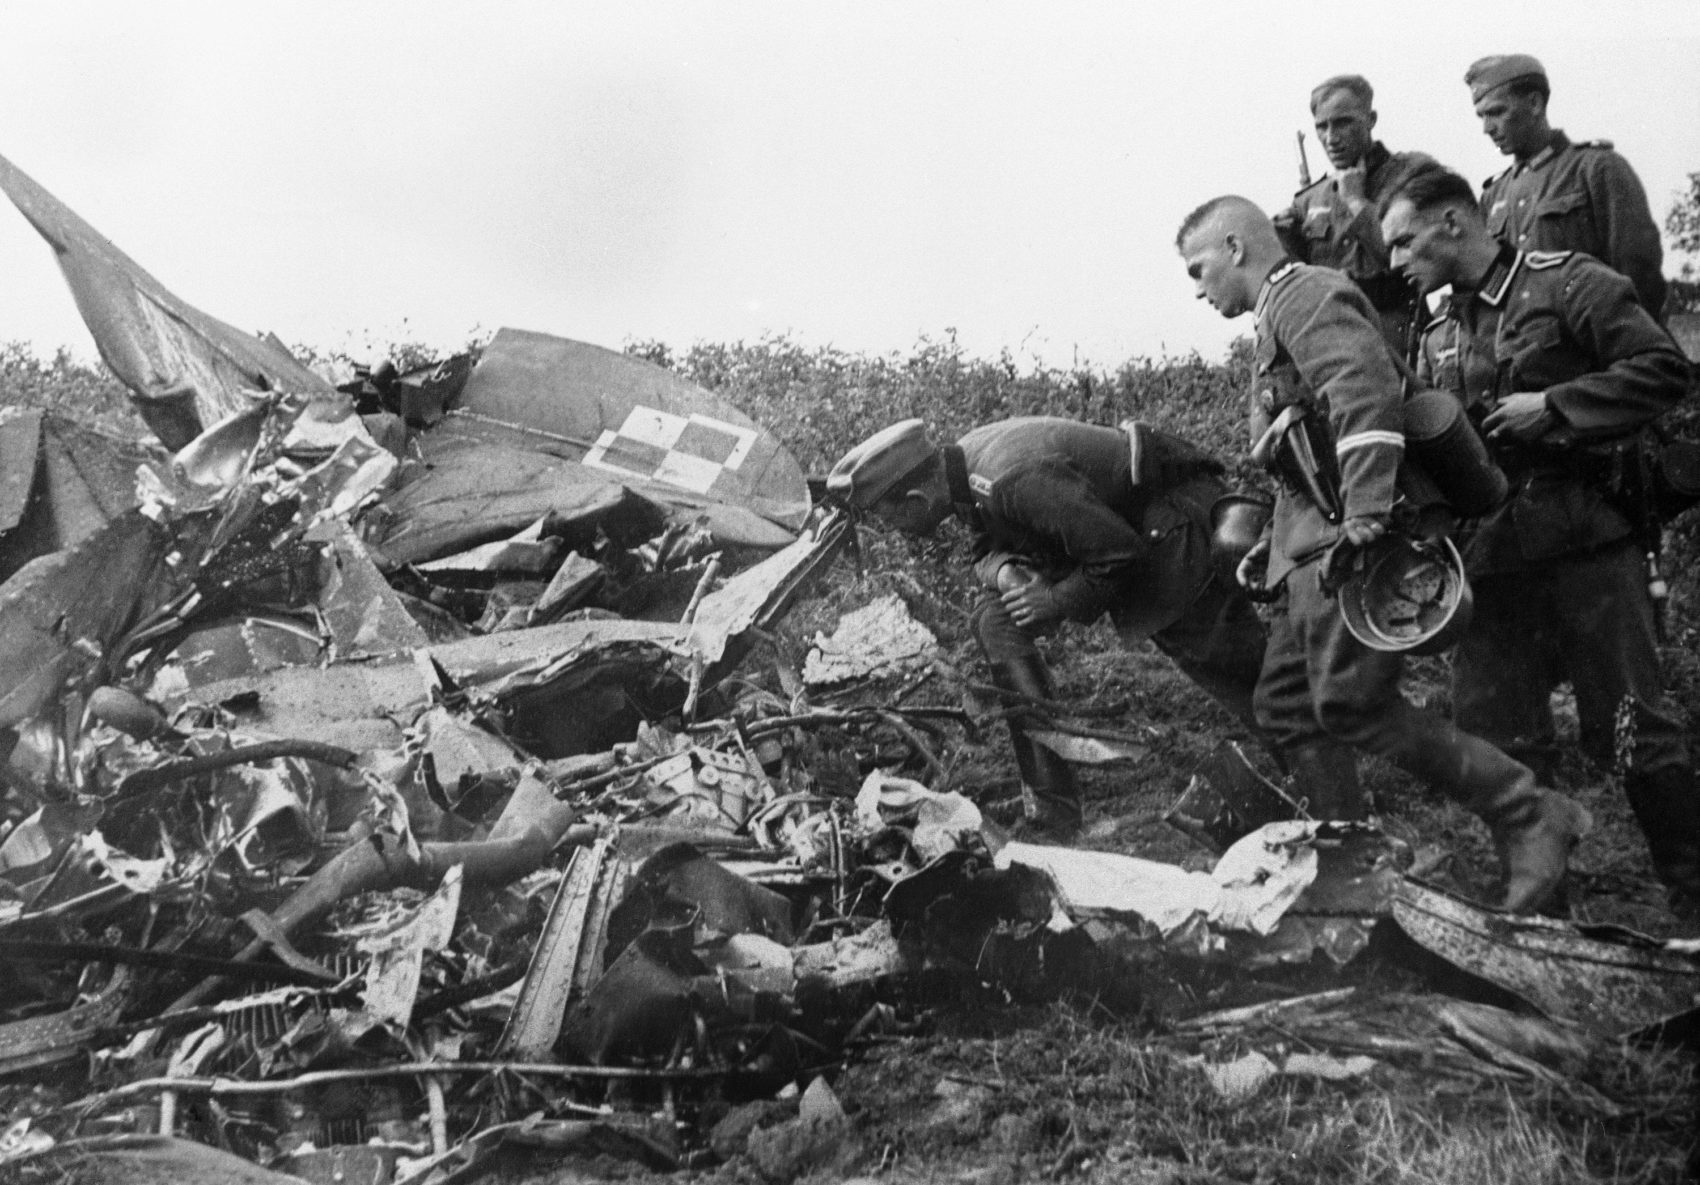 German soldiers inspect the wreckage of a Polish army plane shot down by a German pilot during an air raid, Sept. 8, 1939. (AP file photo)